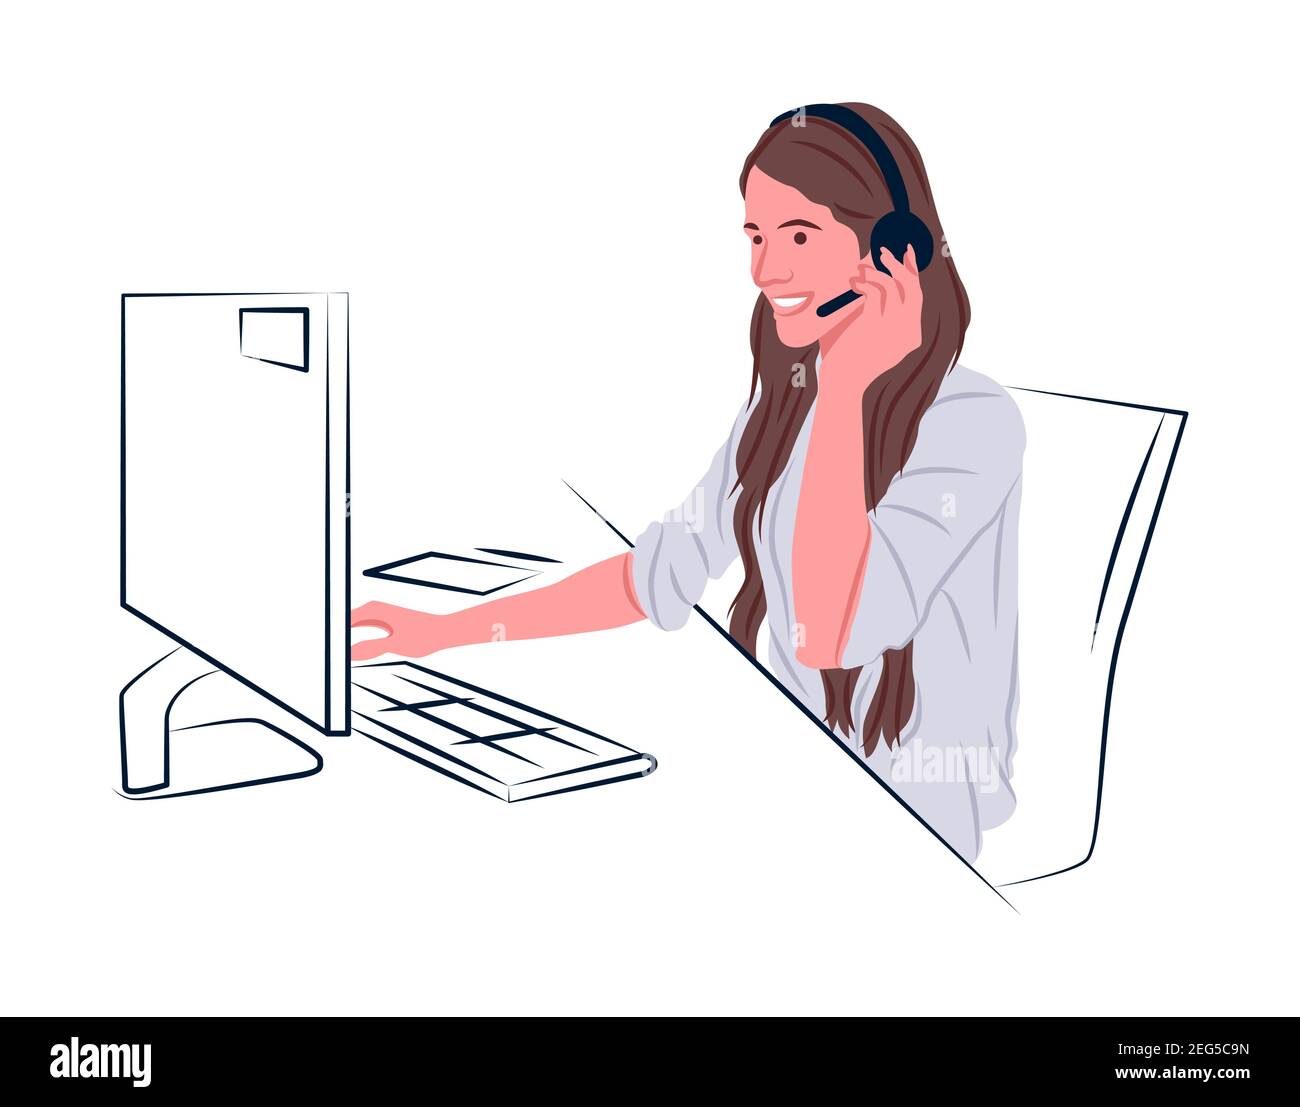 Vector consultant in shadow of sharp lines style Stock Vector